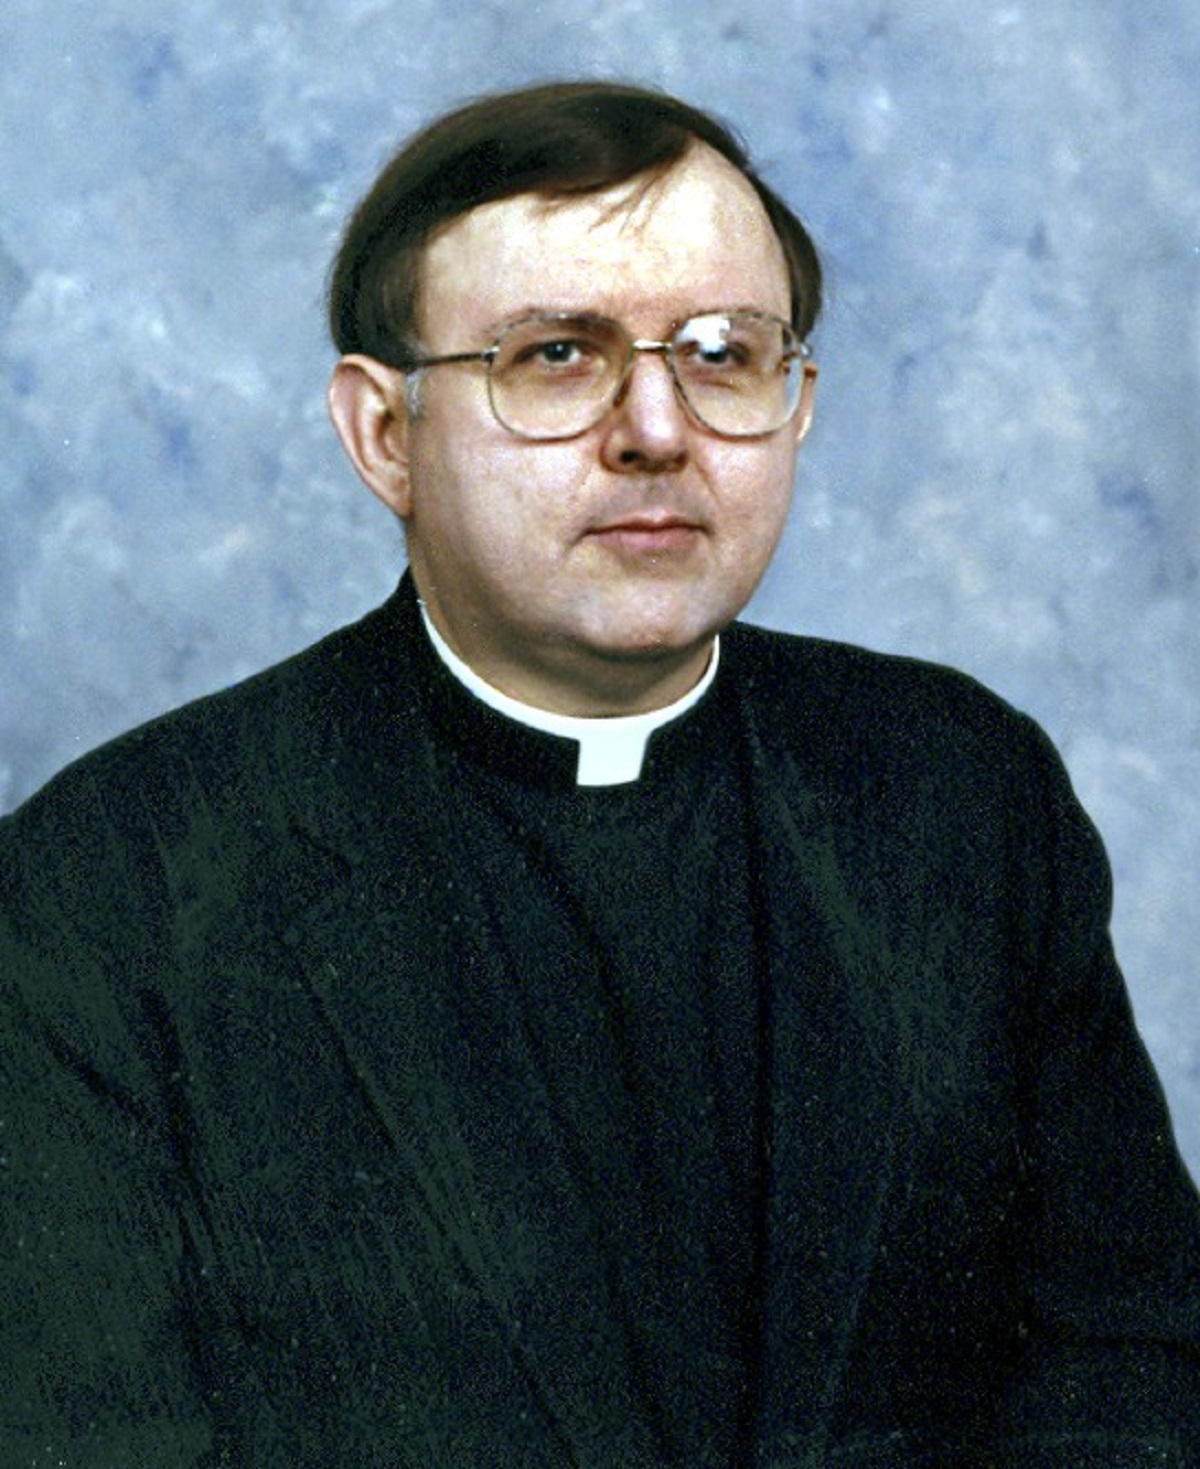 Father Minkler. He was a whistle-blower priest in the Diocese of Albany who exposed a horrific pedophile priest and the bishop of the diocese for child sexual abuse and also covered for other clerics doing the same thing. He wrote a letter to the Vatican on the matter and it got back to the bishop, who was enraged and denied the allegations vehemently. For four years the bishop didn’t know who wrote the letter until a TV station reported it was Father Minker. 
<br/><br/>
The next day Father Minkler was called to the chancery and forced to sign a letter drafted by the bishop's legal counsel denying writing the letter or that the bishop and this priest were guilty of child abuse. Two days later he was conveniently found dead in his home by his sister. At first, it was ruled a heart attack and then changed to a suicide. The diocese produced his signed “statement” recanting the letter he wrote and the bishop claimed exoneration. There was a bottle of pills found near the priest's body later determined to be muscle relaxers. The church claimed the priest intentionally overdosed on these pills and died. They also claimed he left a suicide note. However, no drugs were found in his system and no suicide note has ever been produced.
<br/><br/>
I believe Father Minkler was murdered for doing the right thing. He was posthumously vindicated after the bishop was deposed in 2019 and finally admitted to having committed sexual abuse against children and covering for others. There are currently seven lawsuits pending against the diocese due to his abuse.